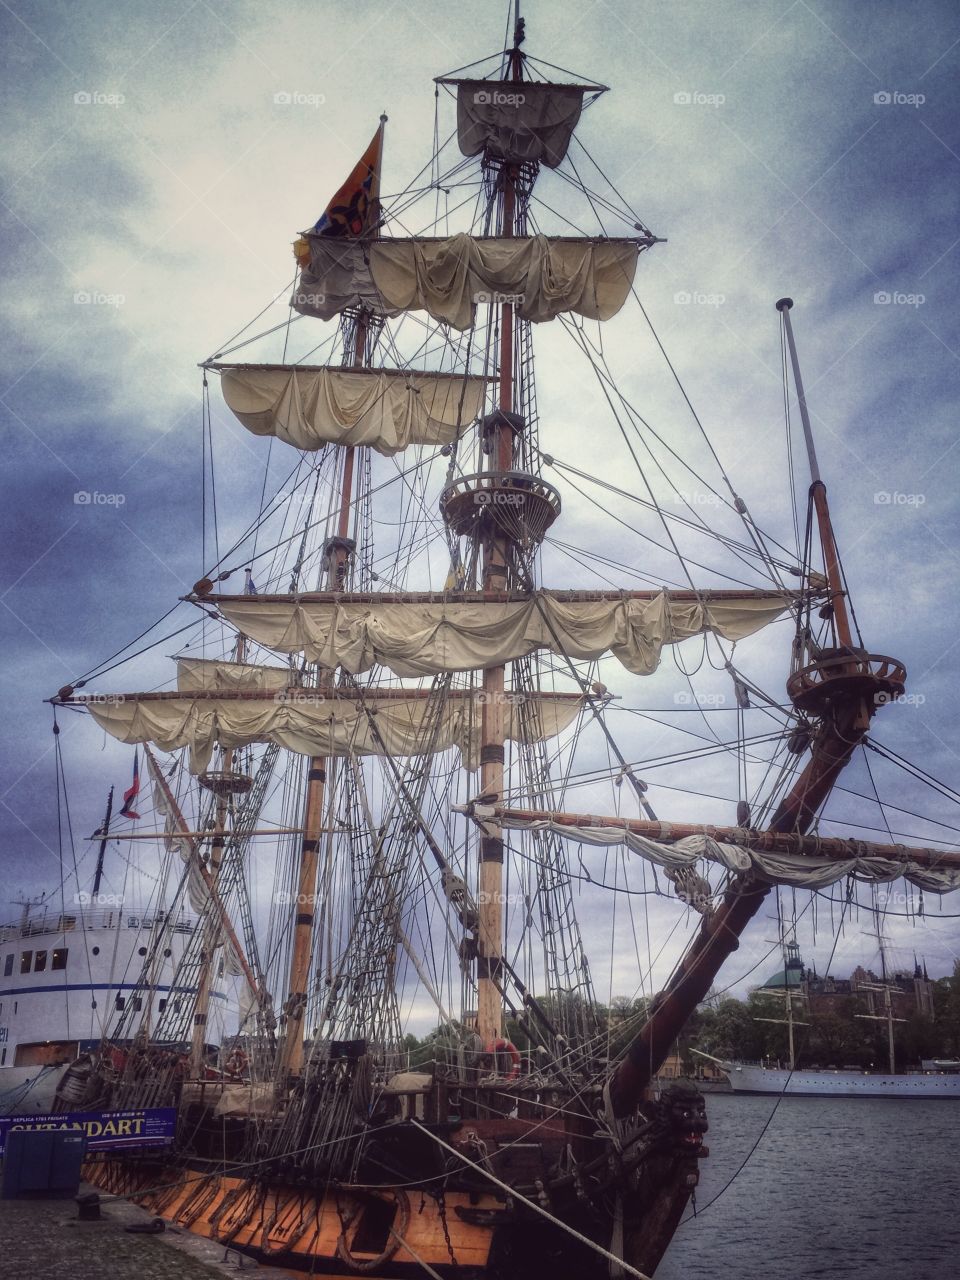 Tall Ship in the Stockholm harbor - intricate setup of masts, sails, ropes - overall beautiful 